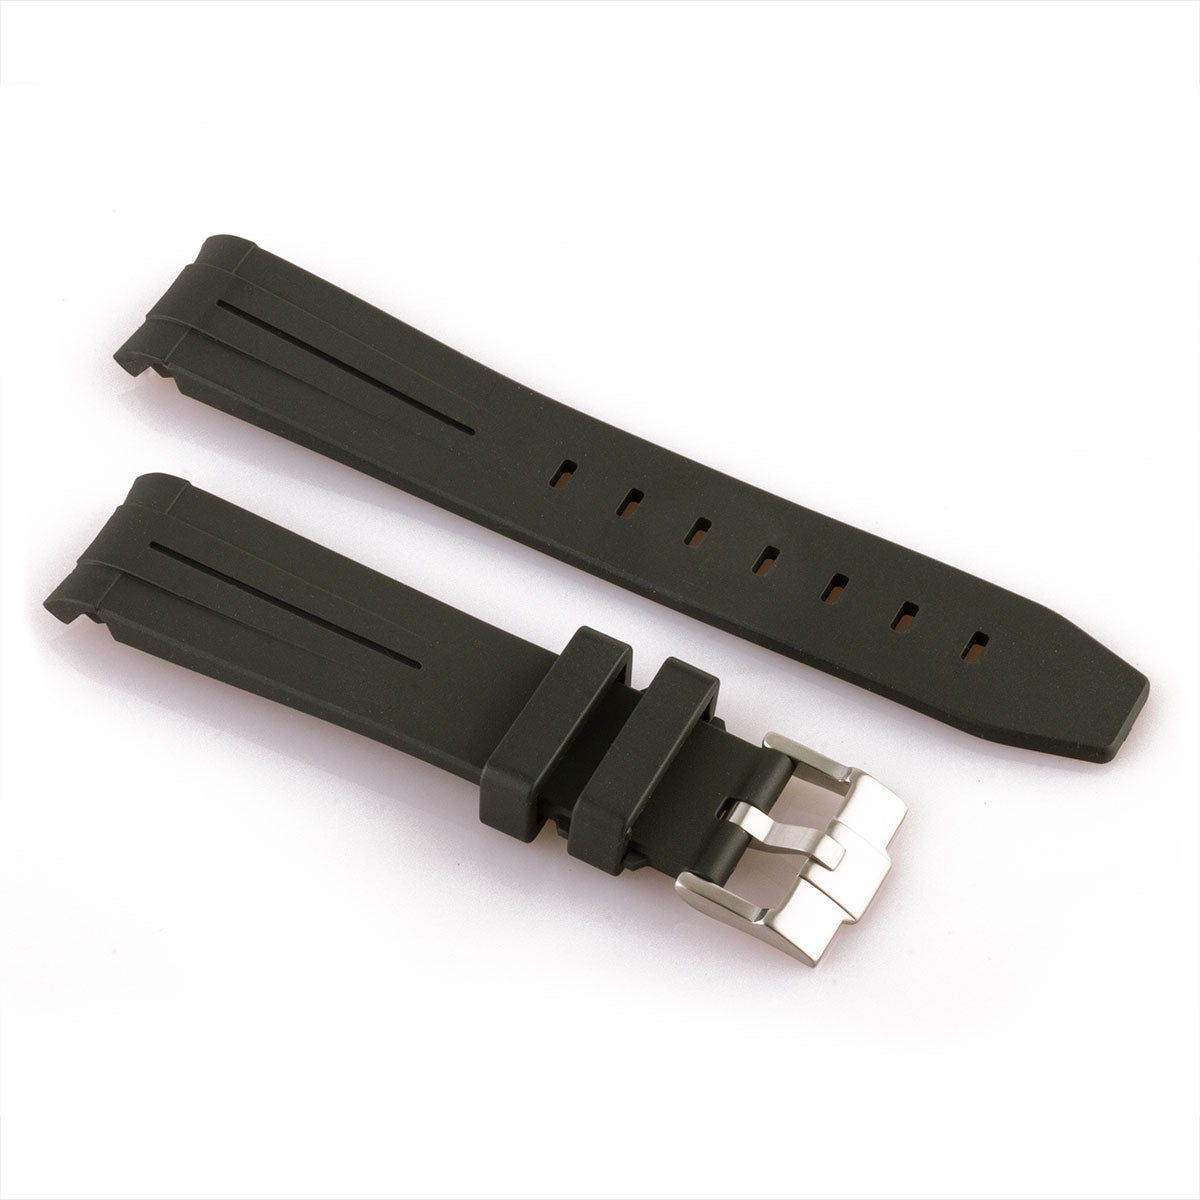 ​Rolex - FKM Rubber integrated watch band with tang buckle (black, blue, green, brown...)